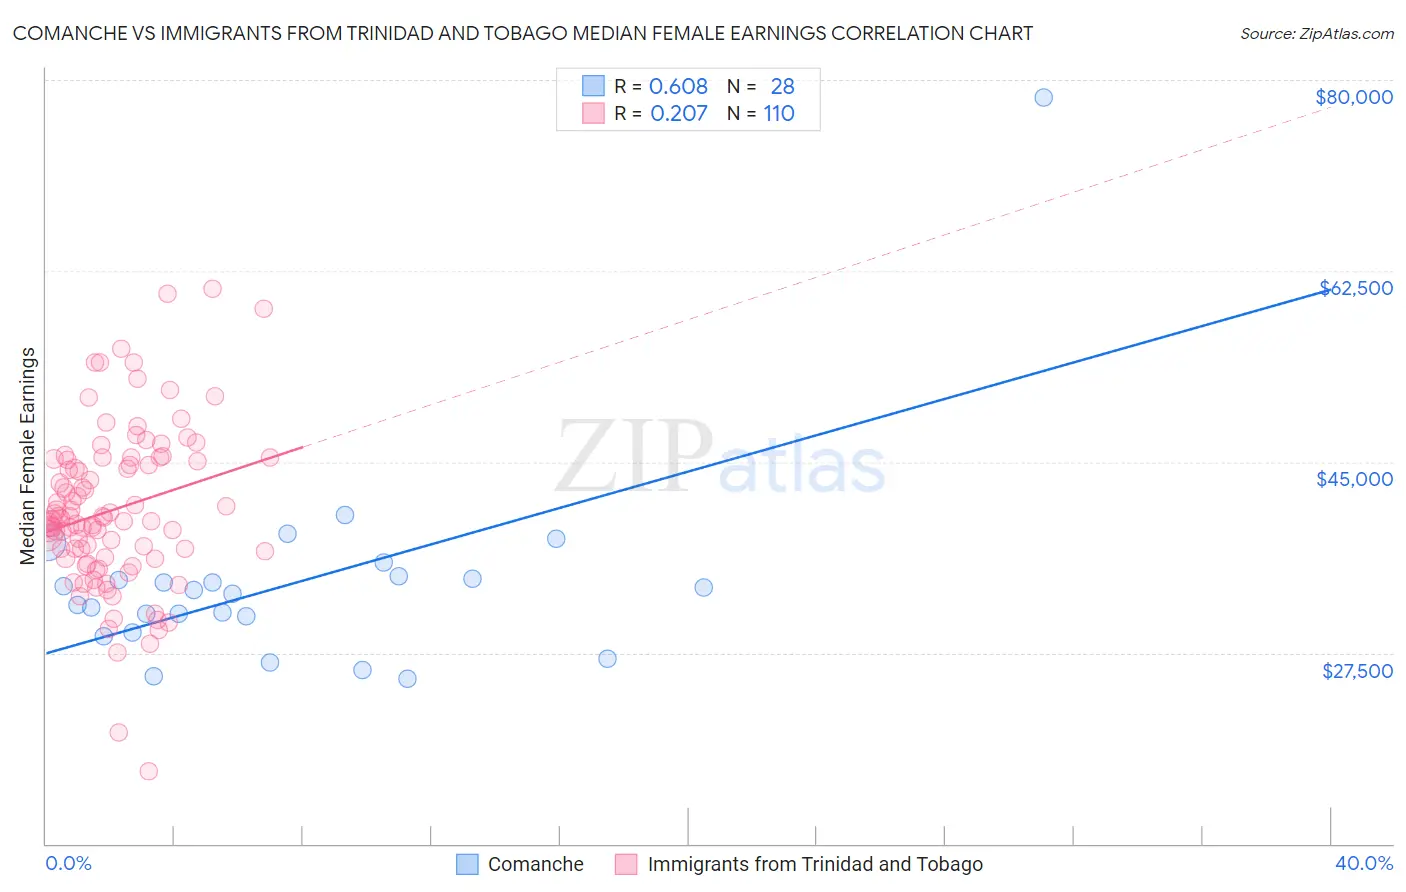 Comanche vs Immigrants from Trinidad and Tobago Median Female Earnings